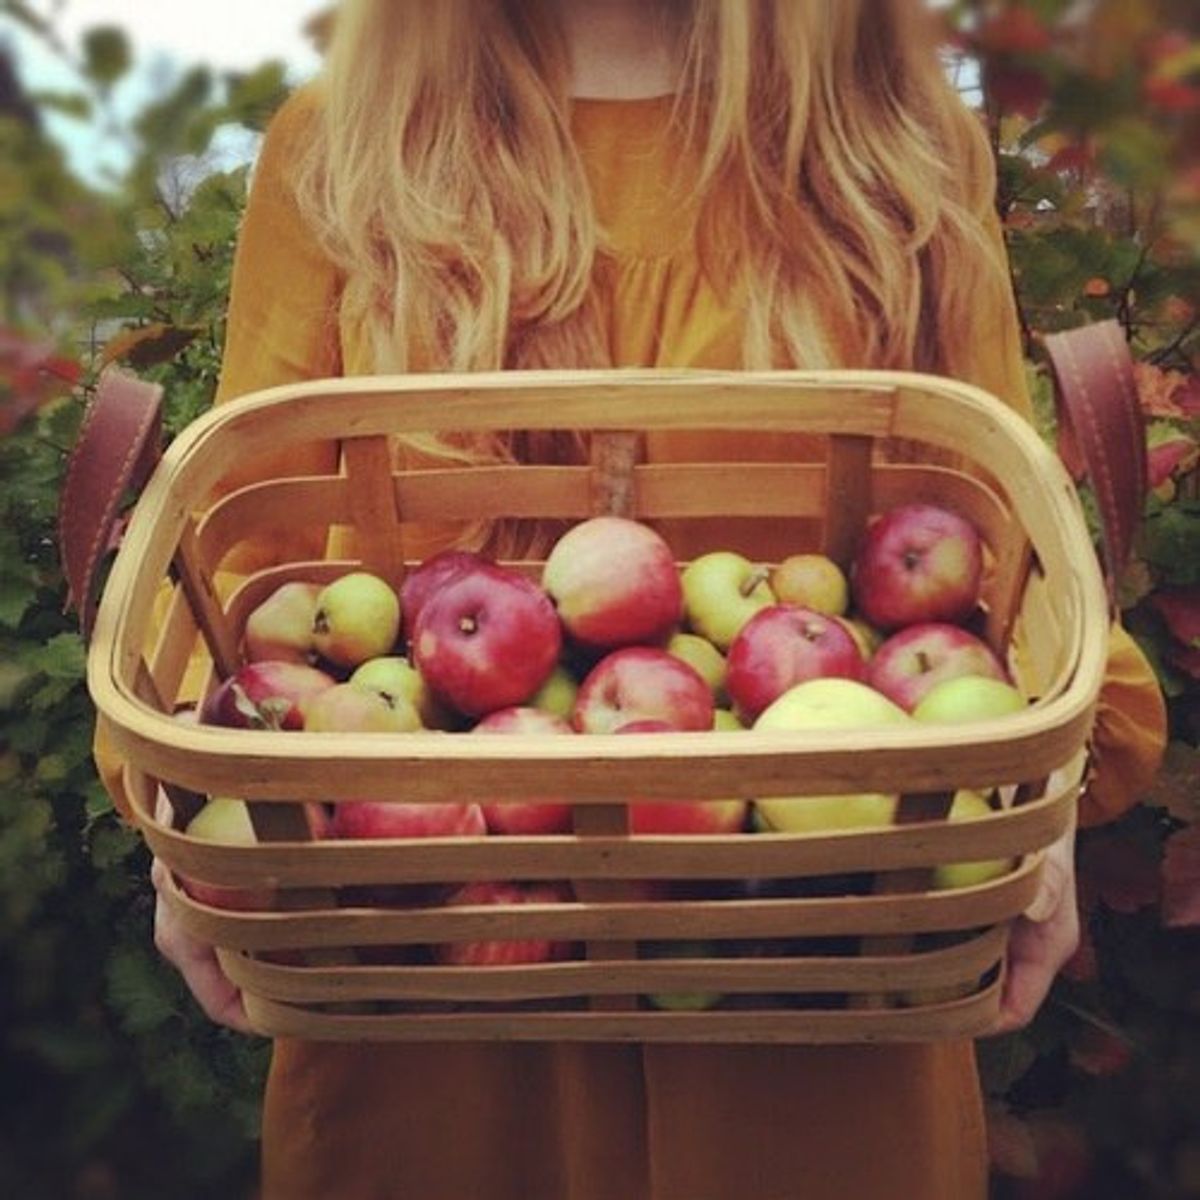 11 Reasons You're Excited For Fall